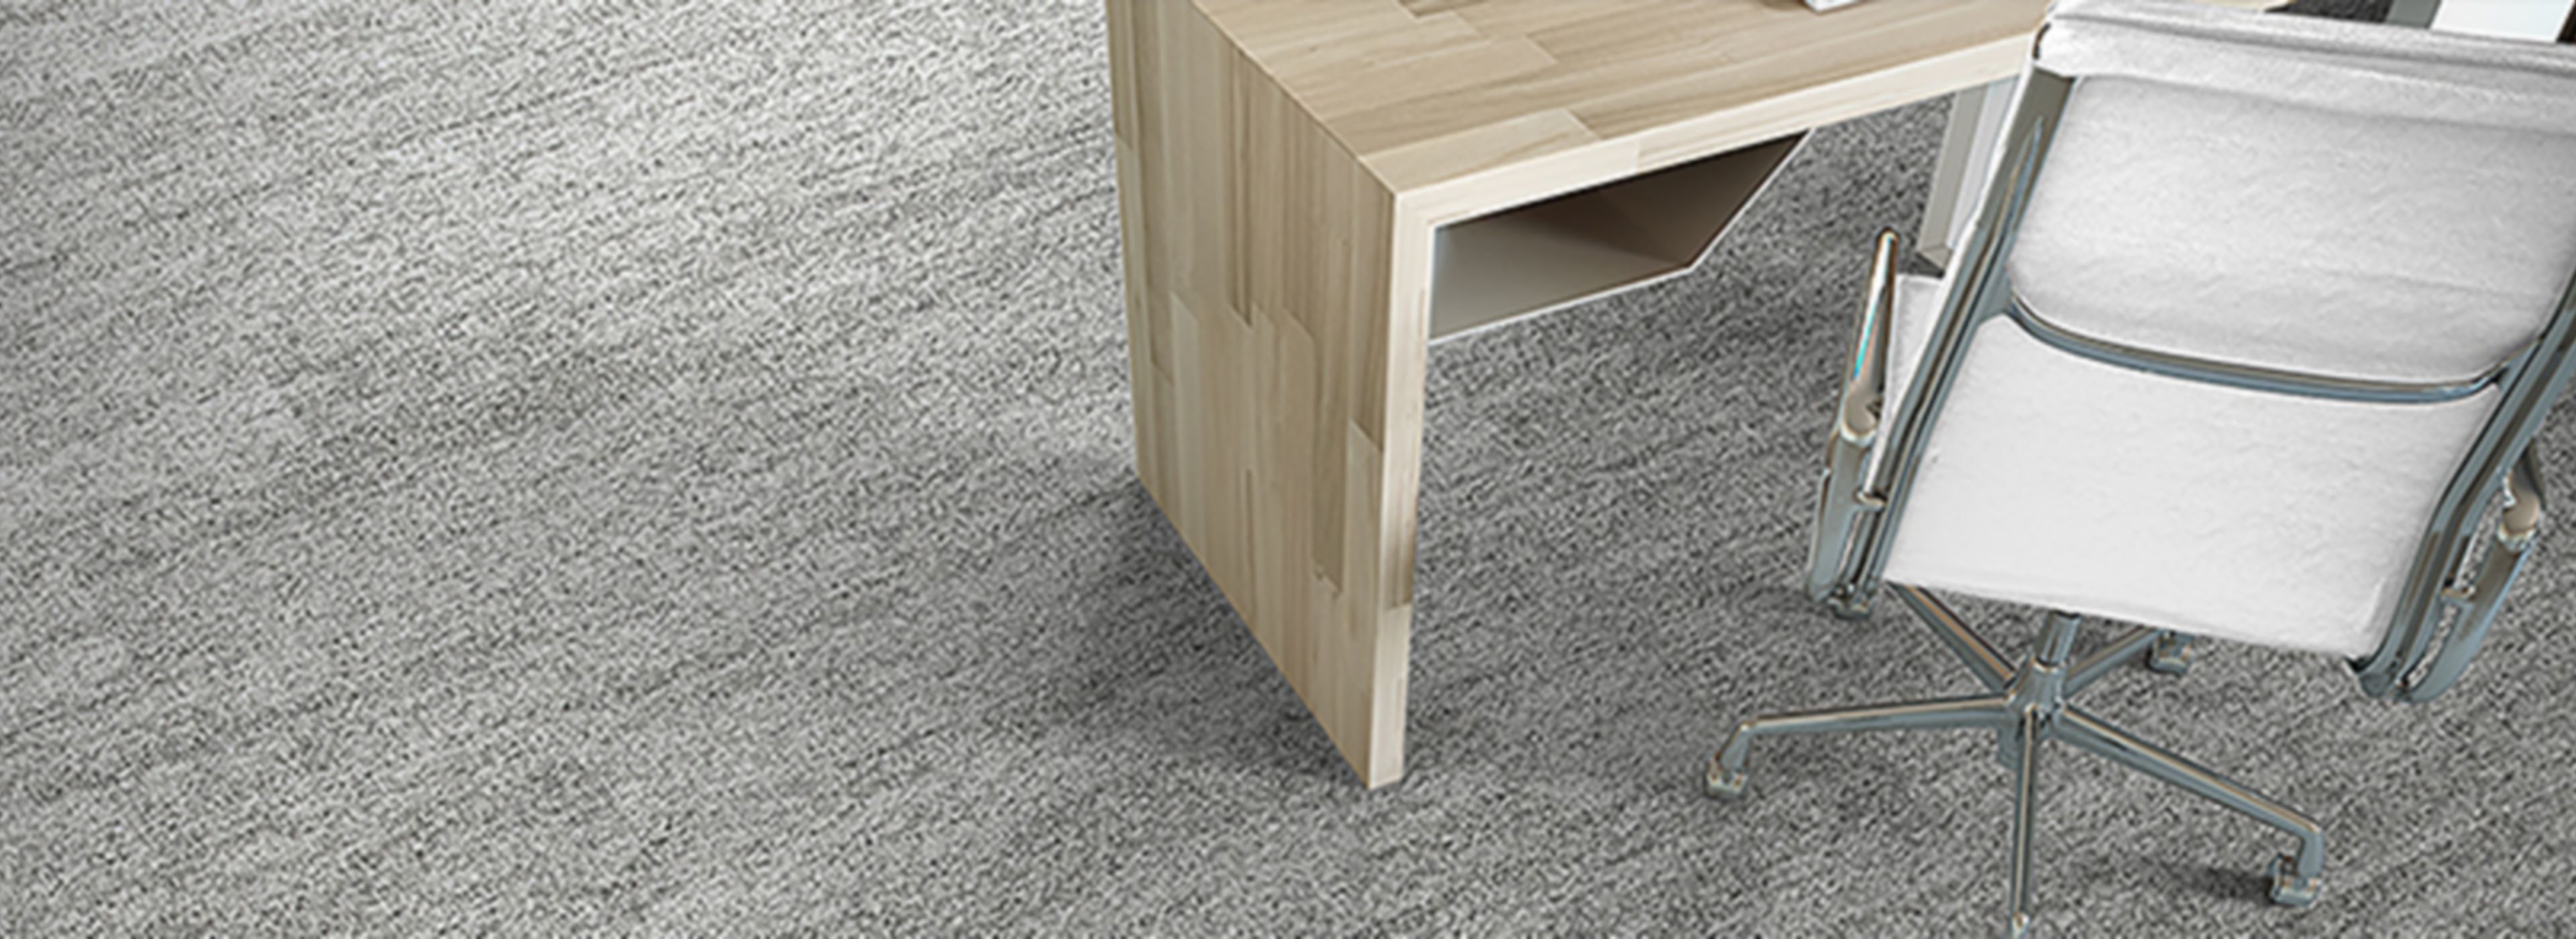 Interface Open Air 402 plank carpet tile in floor view with wood work desk and rolling office chair image number 1